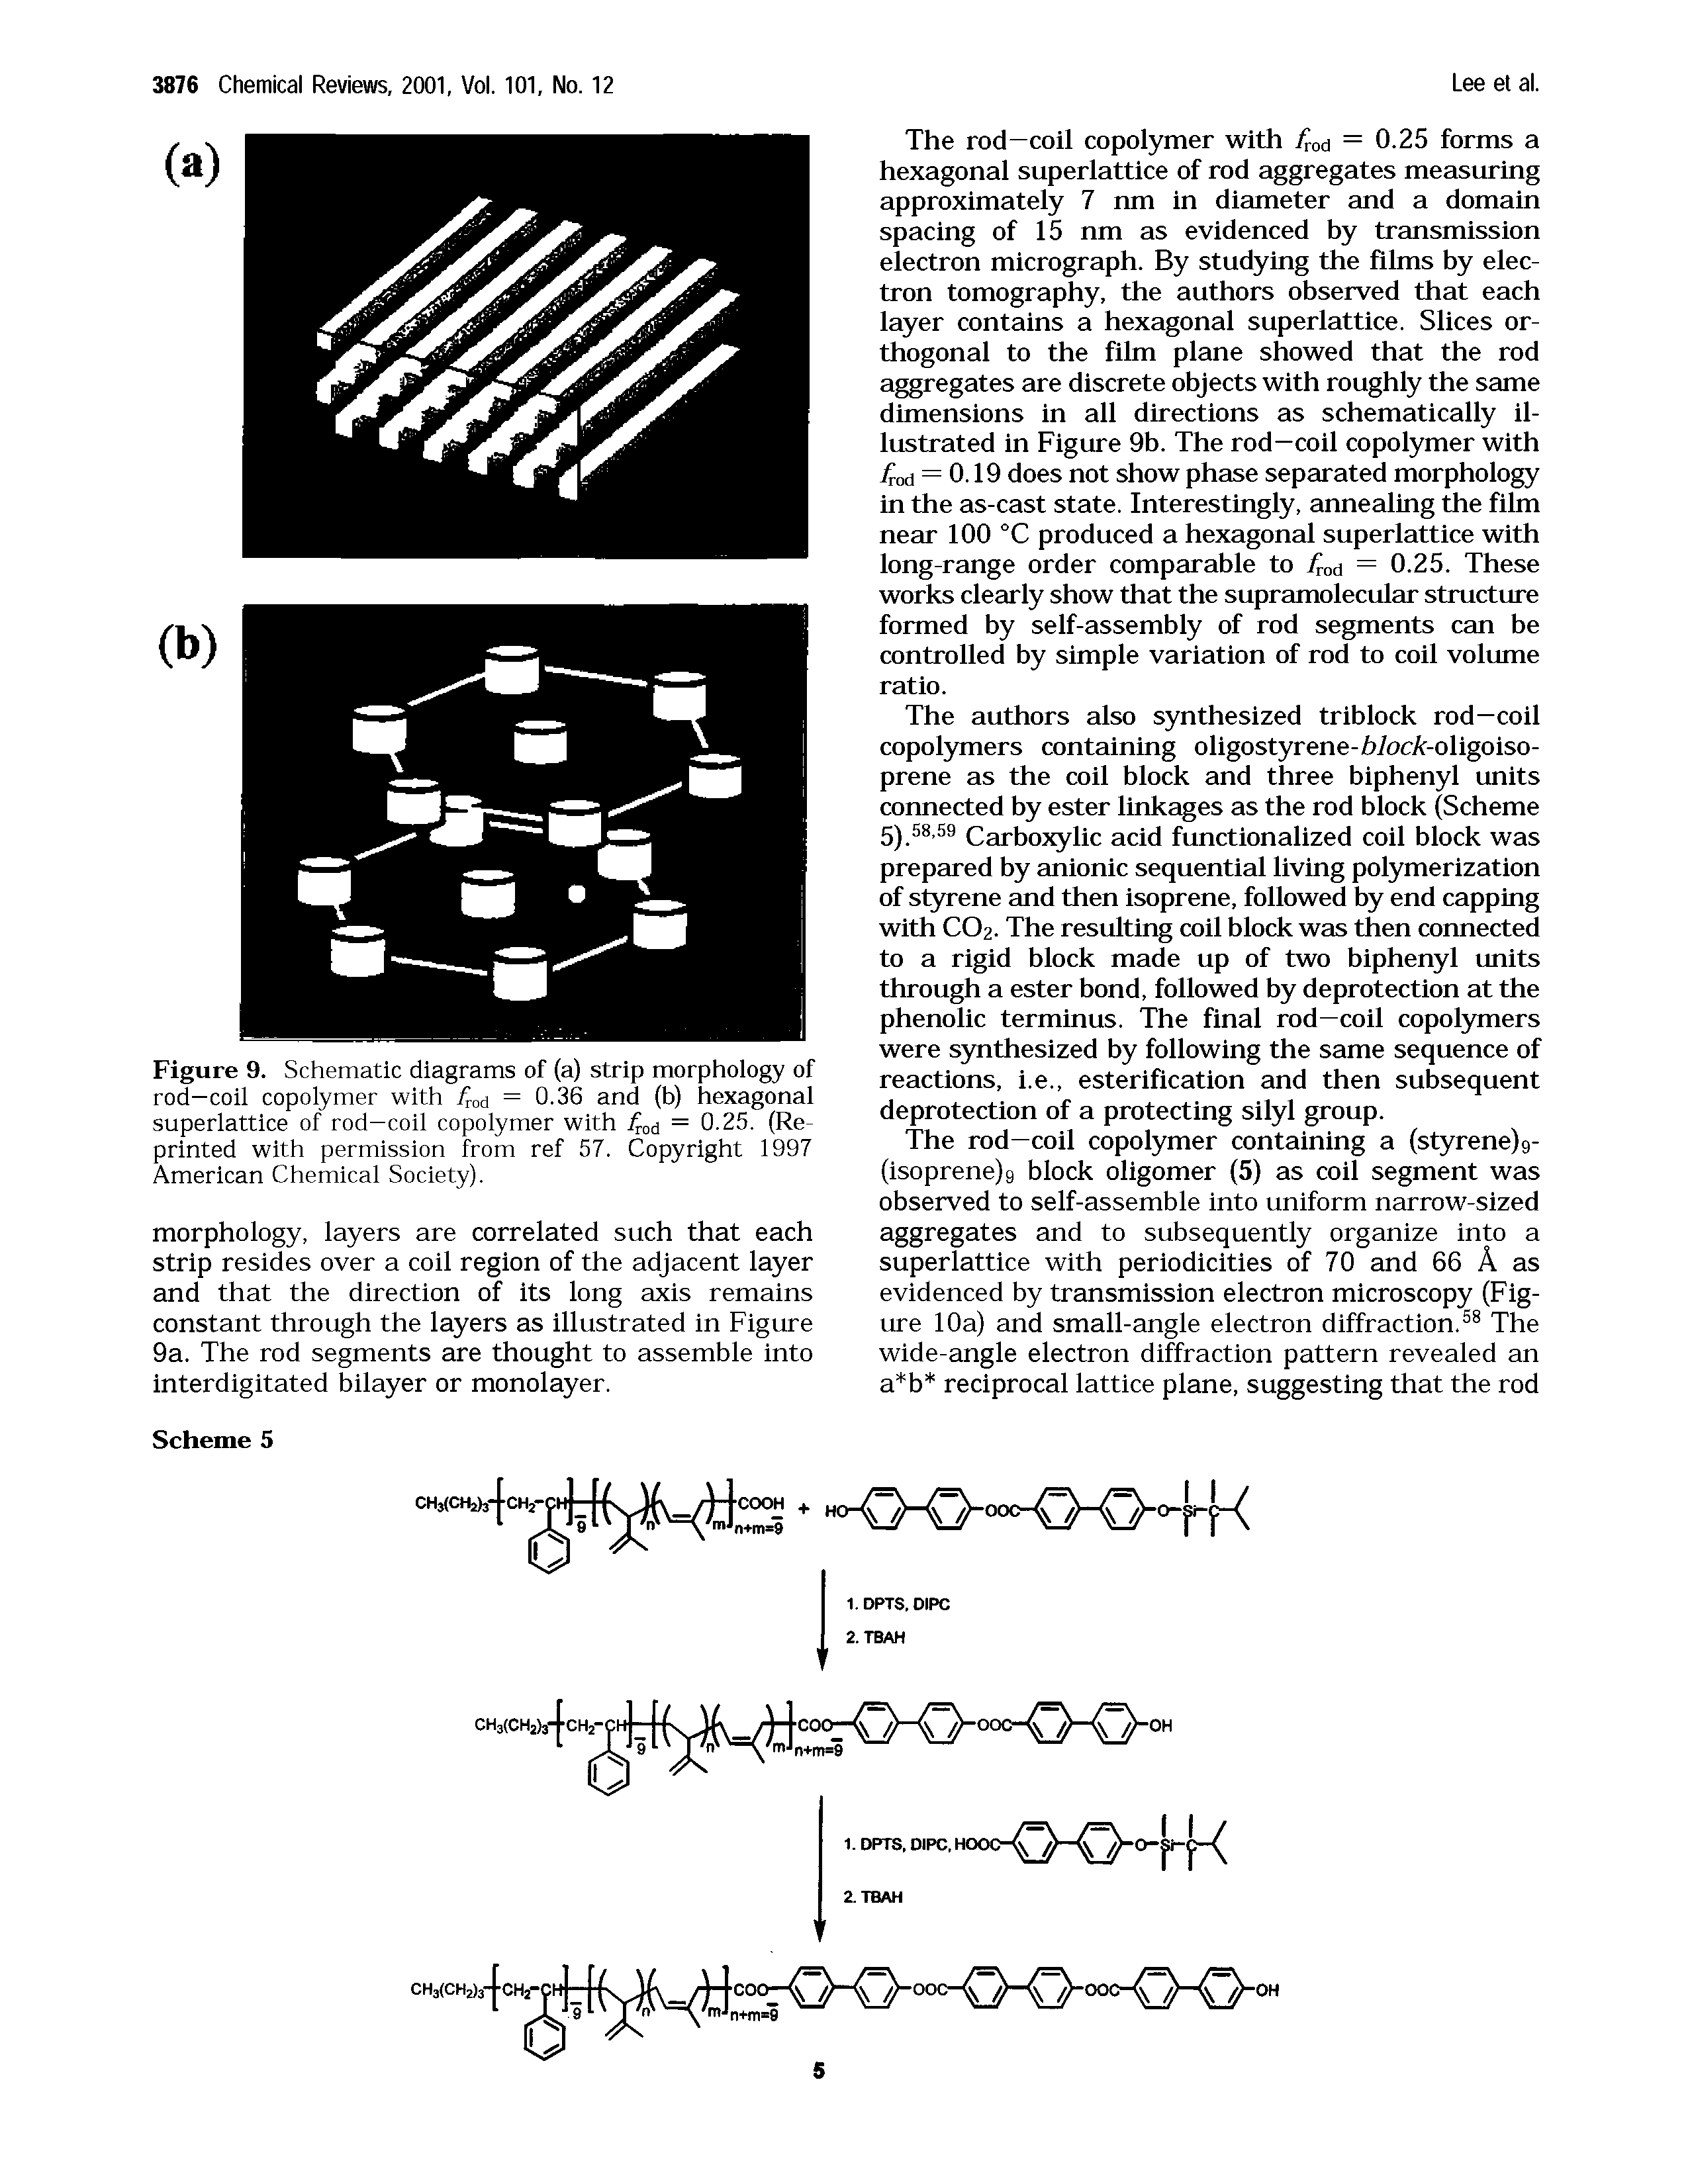 Figure 9. Schematic diagrams of (a) strip morphology of rod—coil copolymer with Trod = 0.36 and (b) hexagonal superlattice of rod—coil copolymer with fmlj = 0.25. (Reprinted with permission from ref 57. Copyright 1997 American Chemical Society).